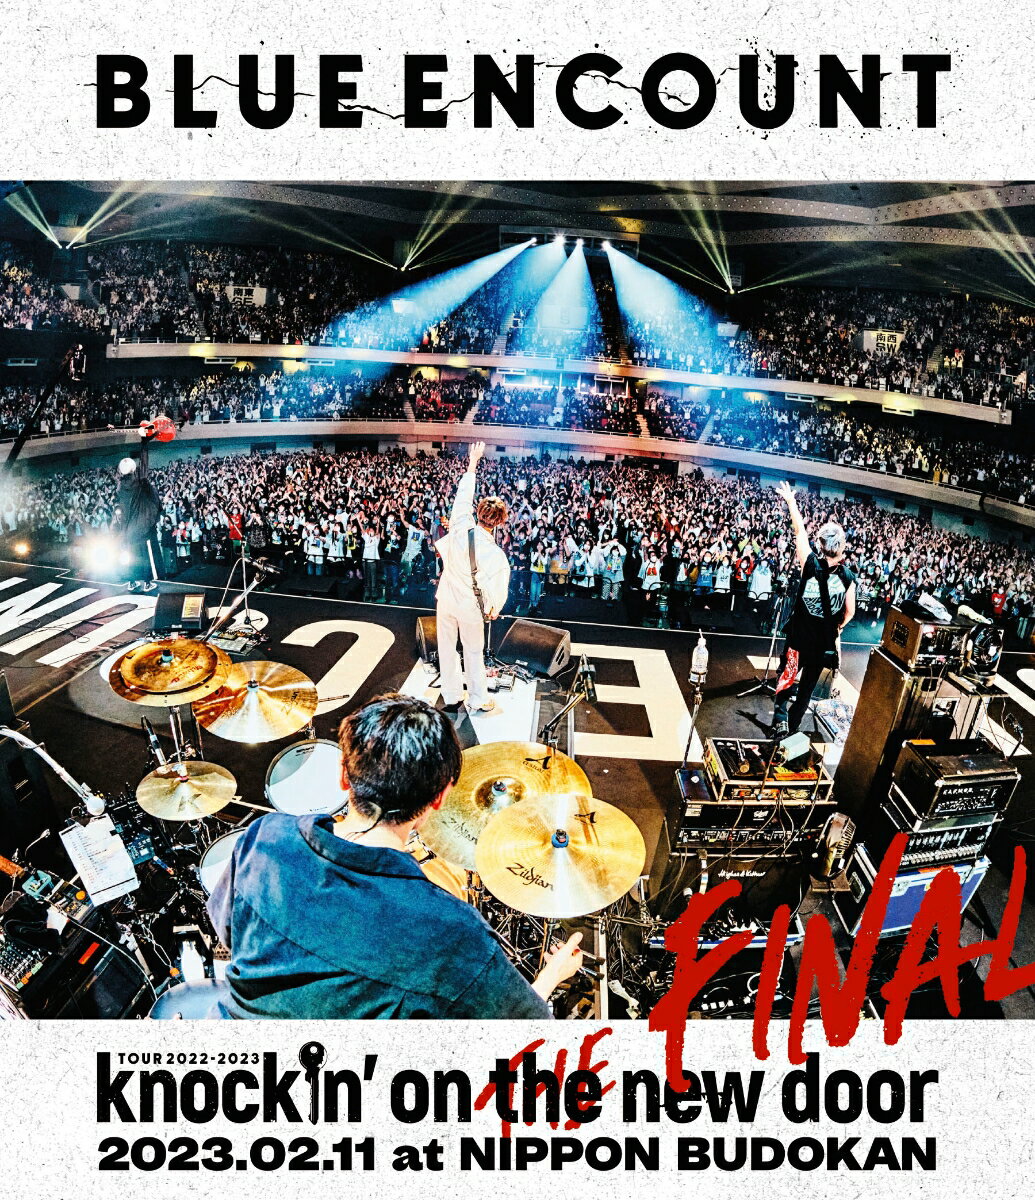 「BLUE ENCOUNT TOUR 2022-2023 ～knockin 039 on the new door～THE FINAL」2023.02.11 at NIPPON BUDOKAN(Blu-ray通常盤)【Blu-ray】 BLUE ENCOUNT